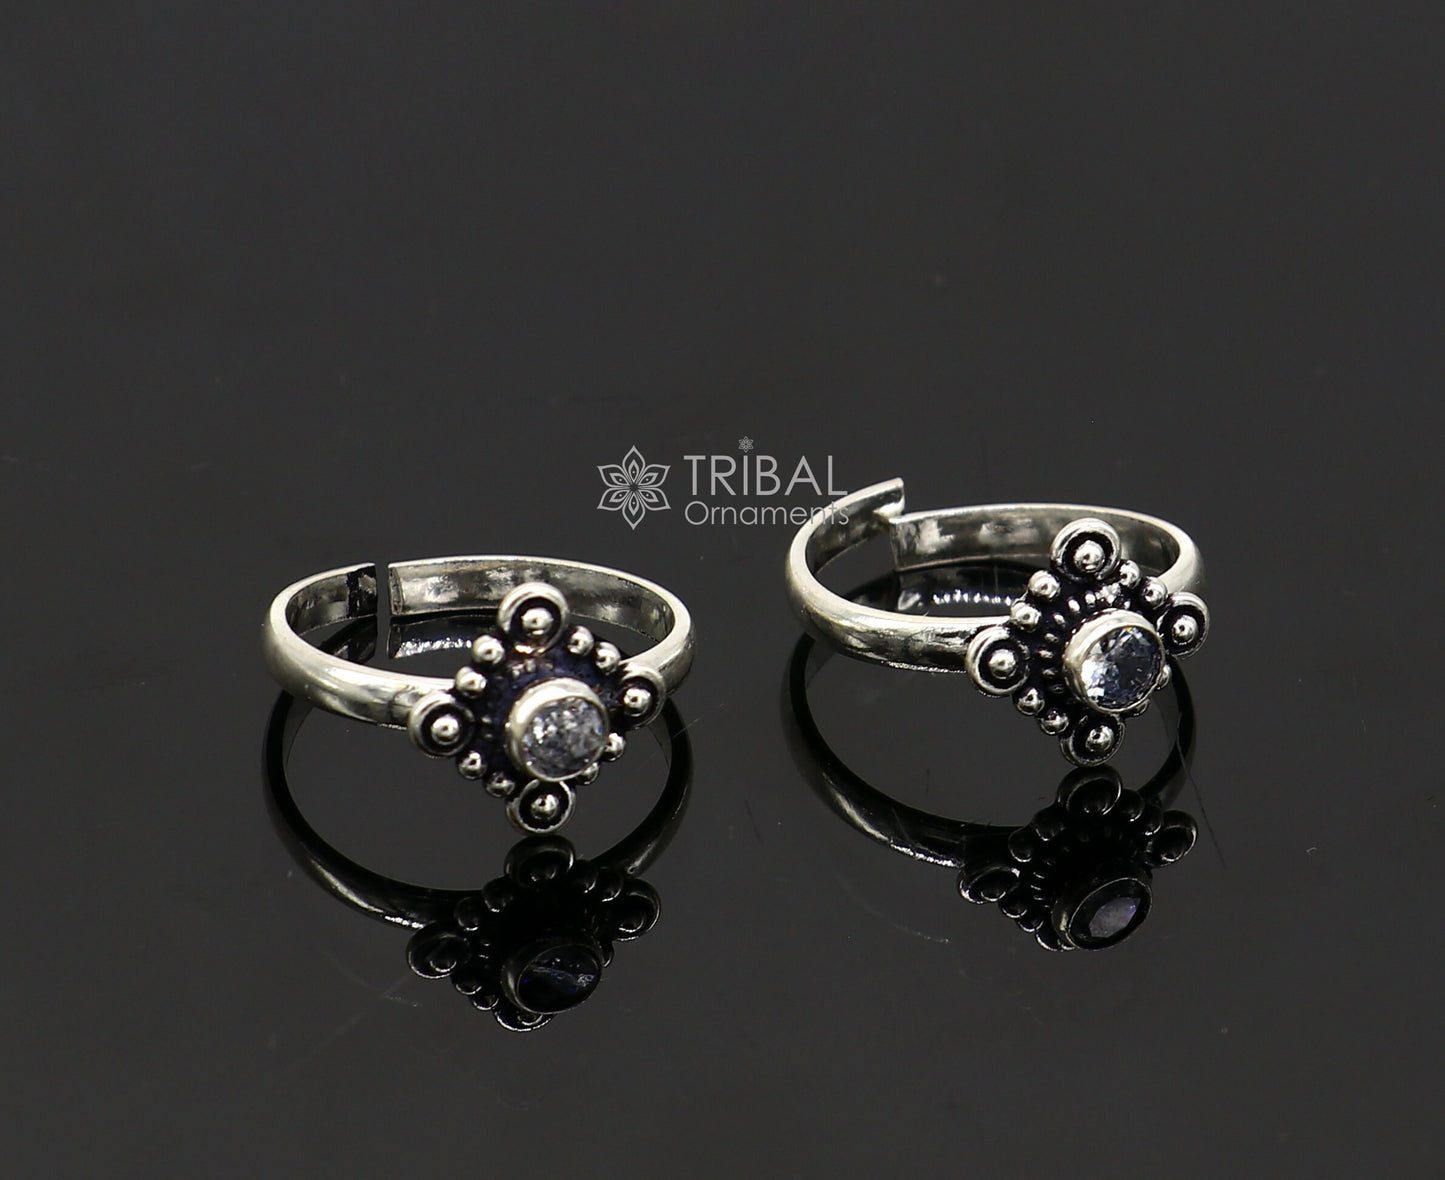 925 sterling silver adjustable size toe ring band cubic zircon stone tribal belly dance ethnic cultural  jewelry from india ntr91 - TRIBAL ORNAMENTS